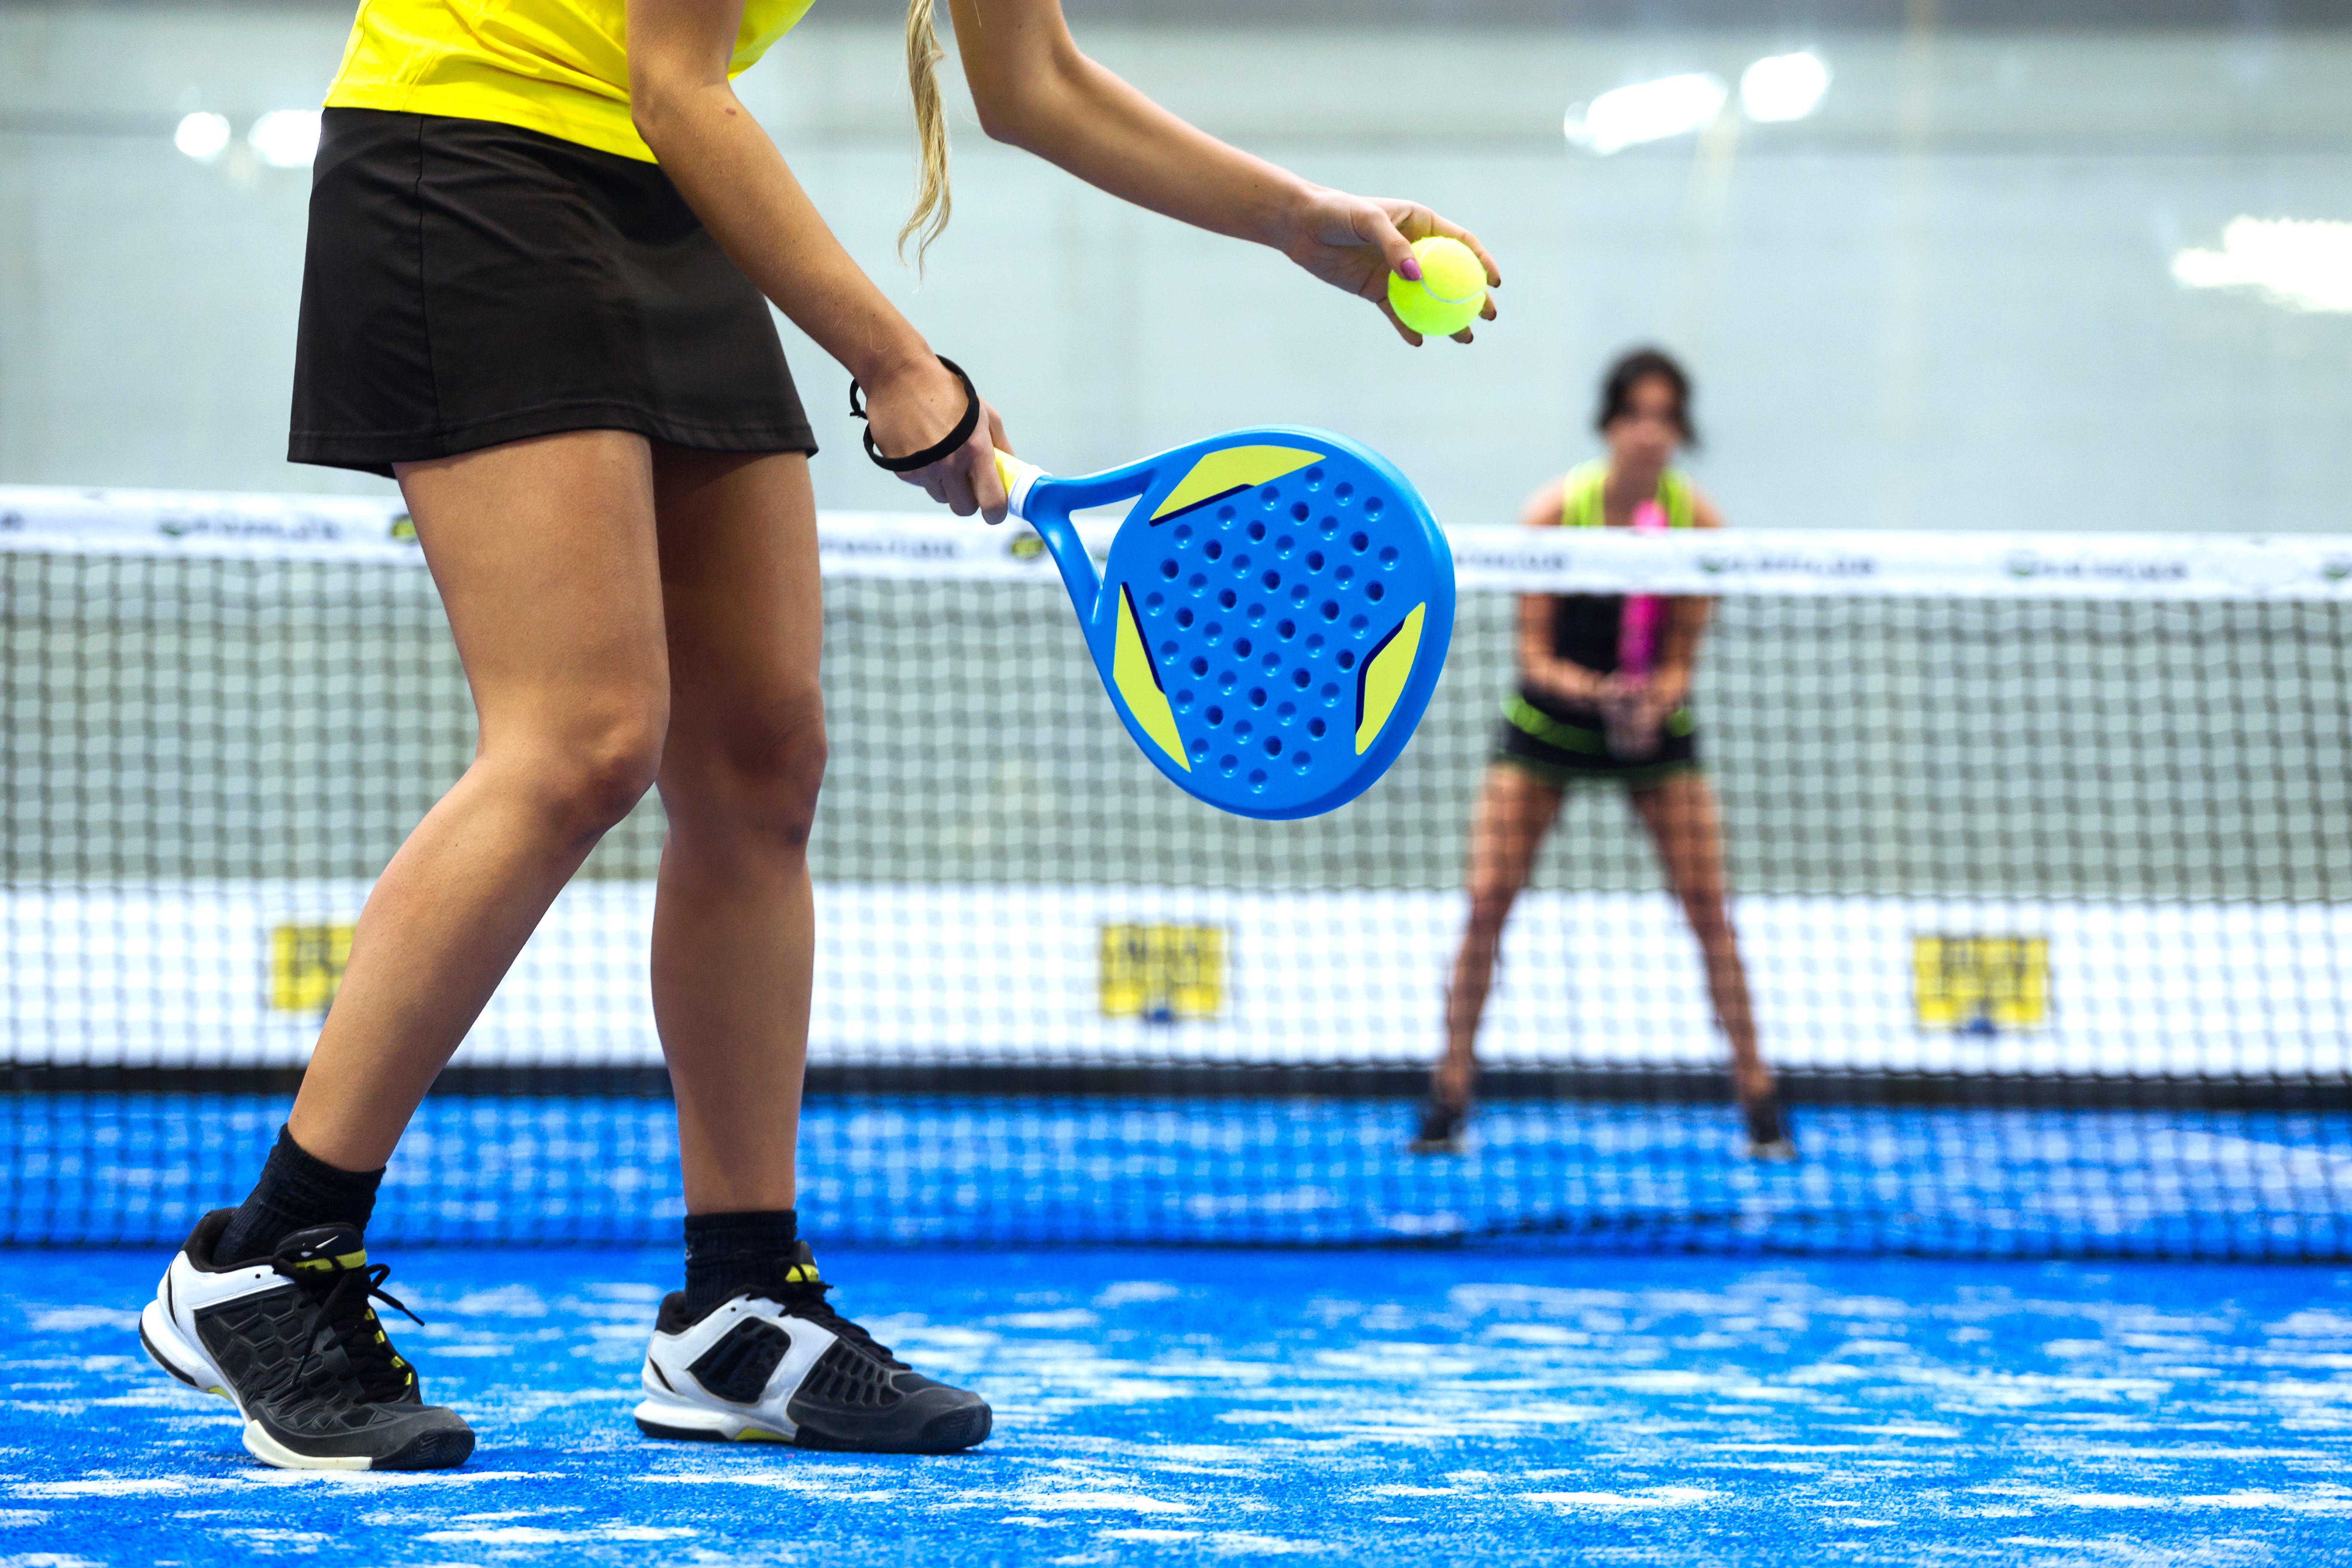 Why Padel is the Next Big Thing in American Sports